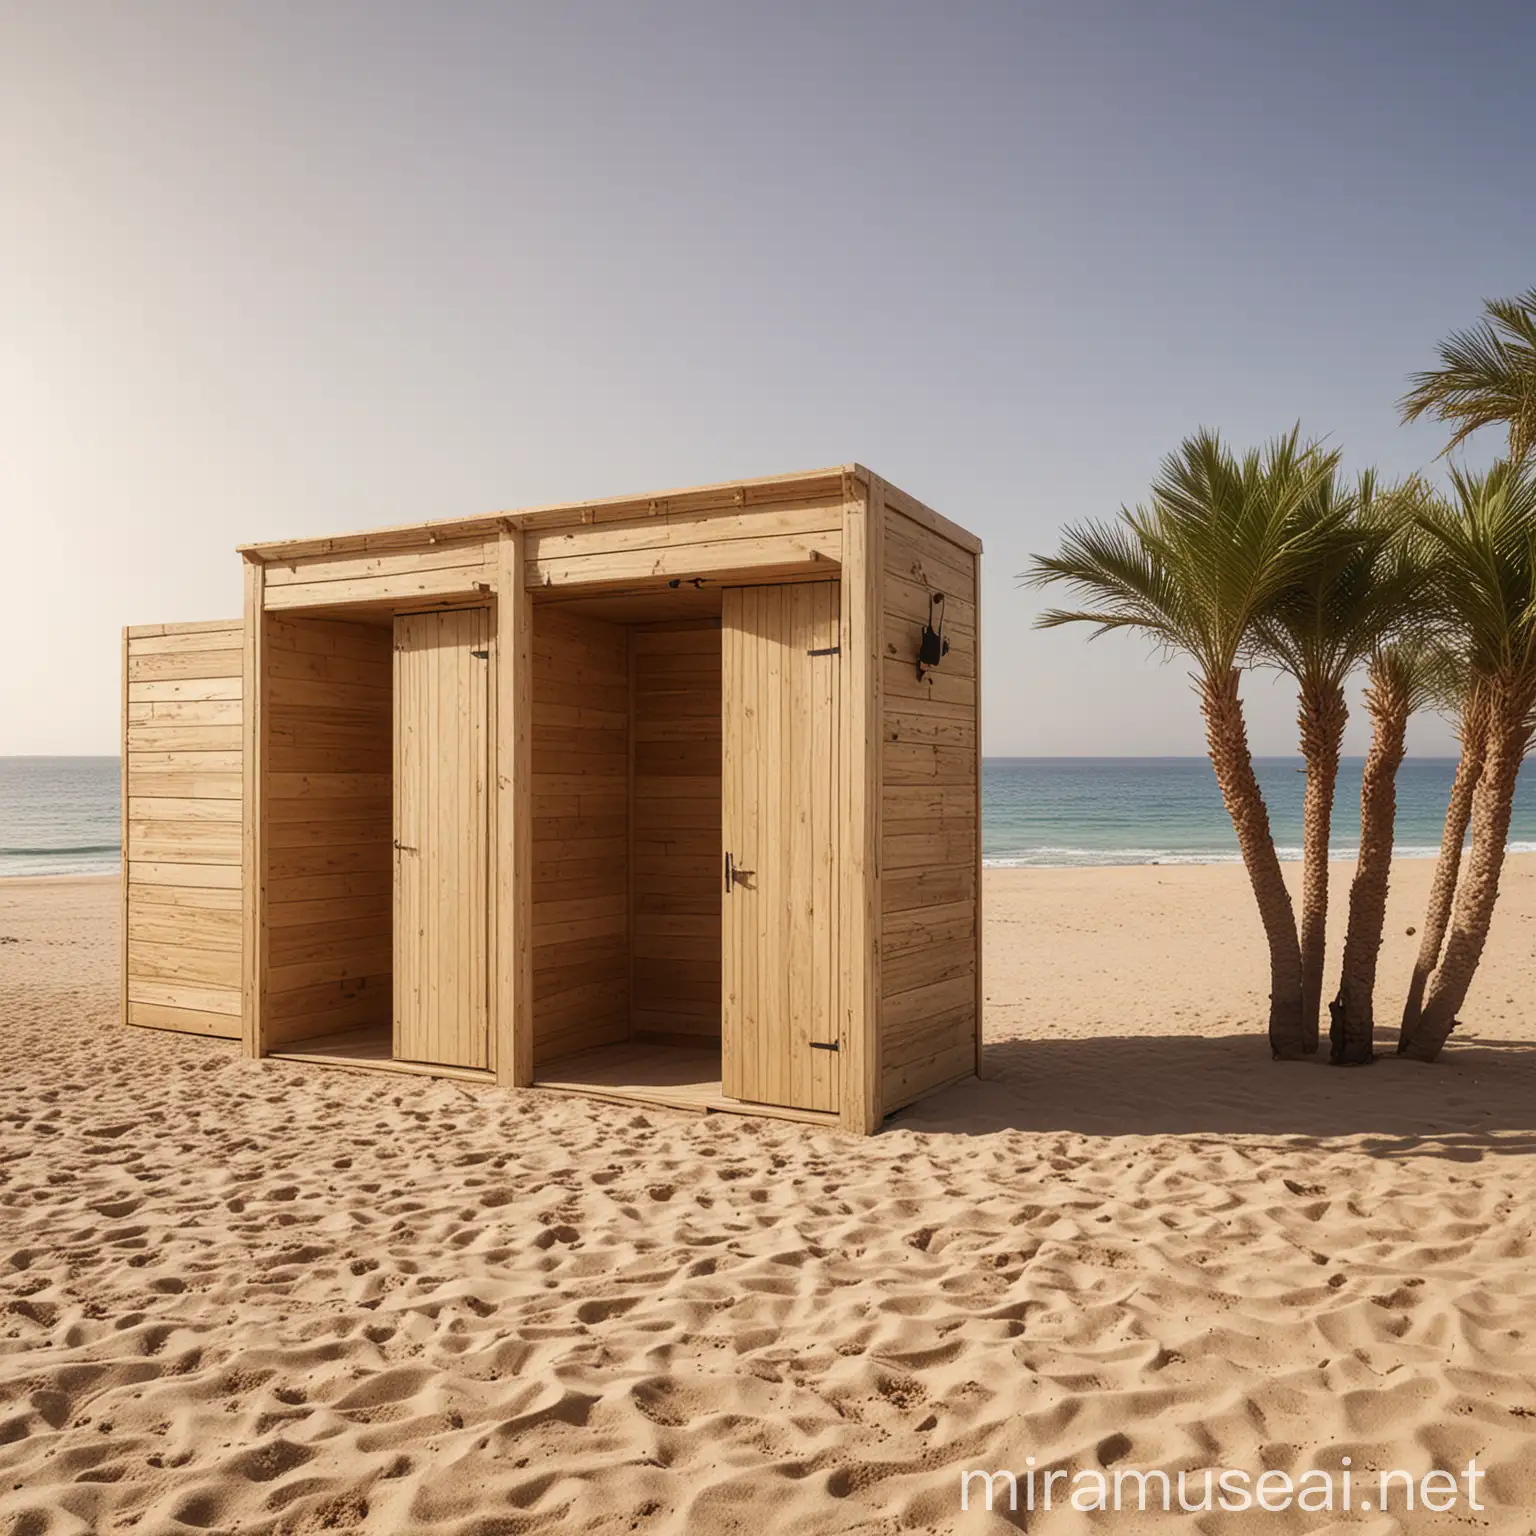 Morning Beach Scene Aesthetic Wooden Changing Rooms in Egypt